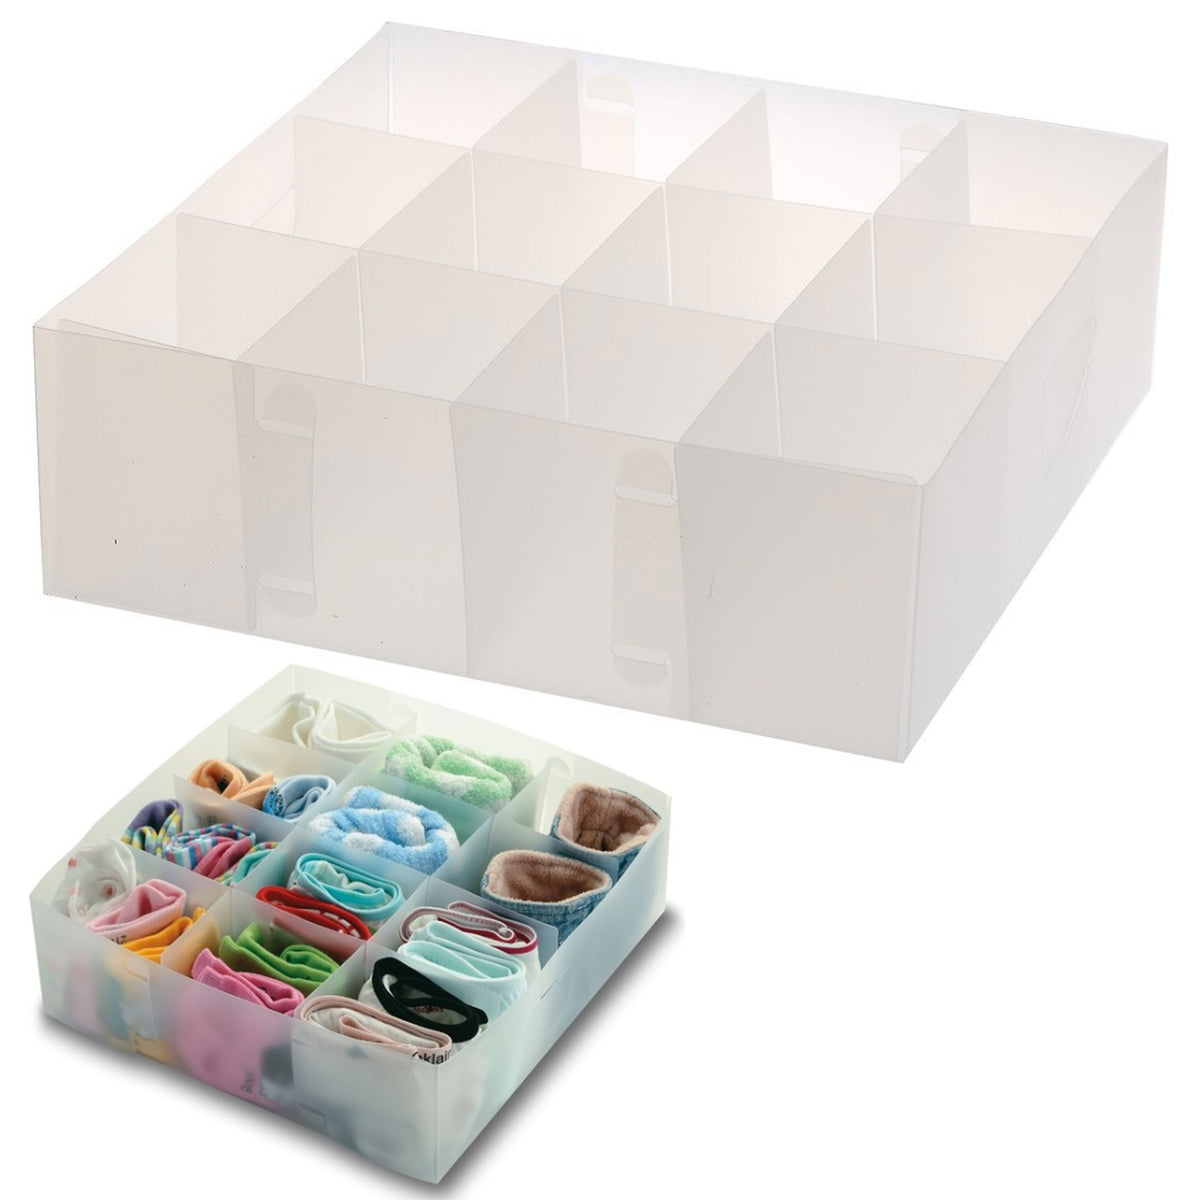 SELPONT r with Lid, 30 Cell Underwear Drawer Organizer Foldable